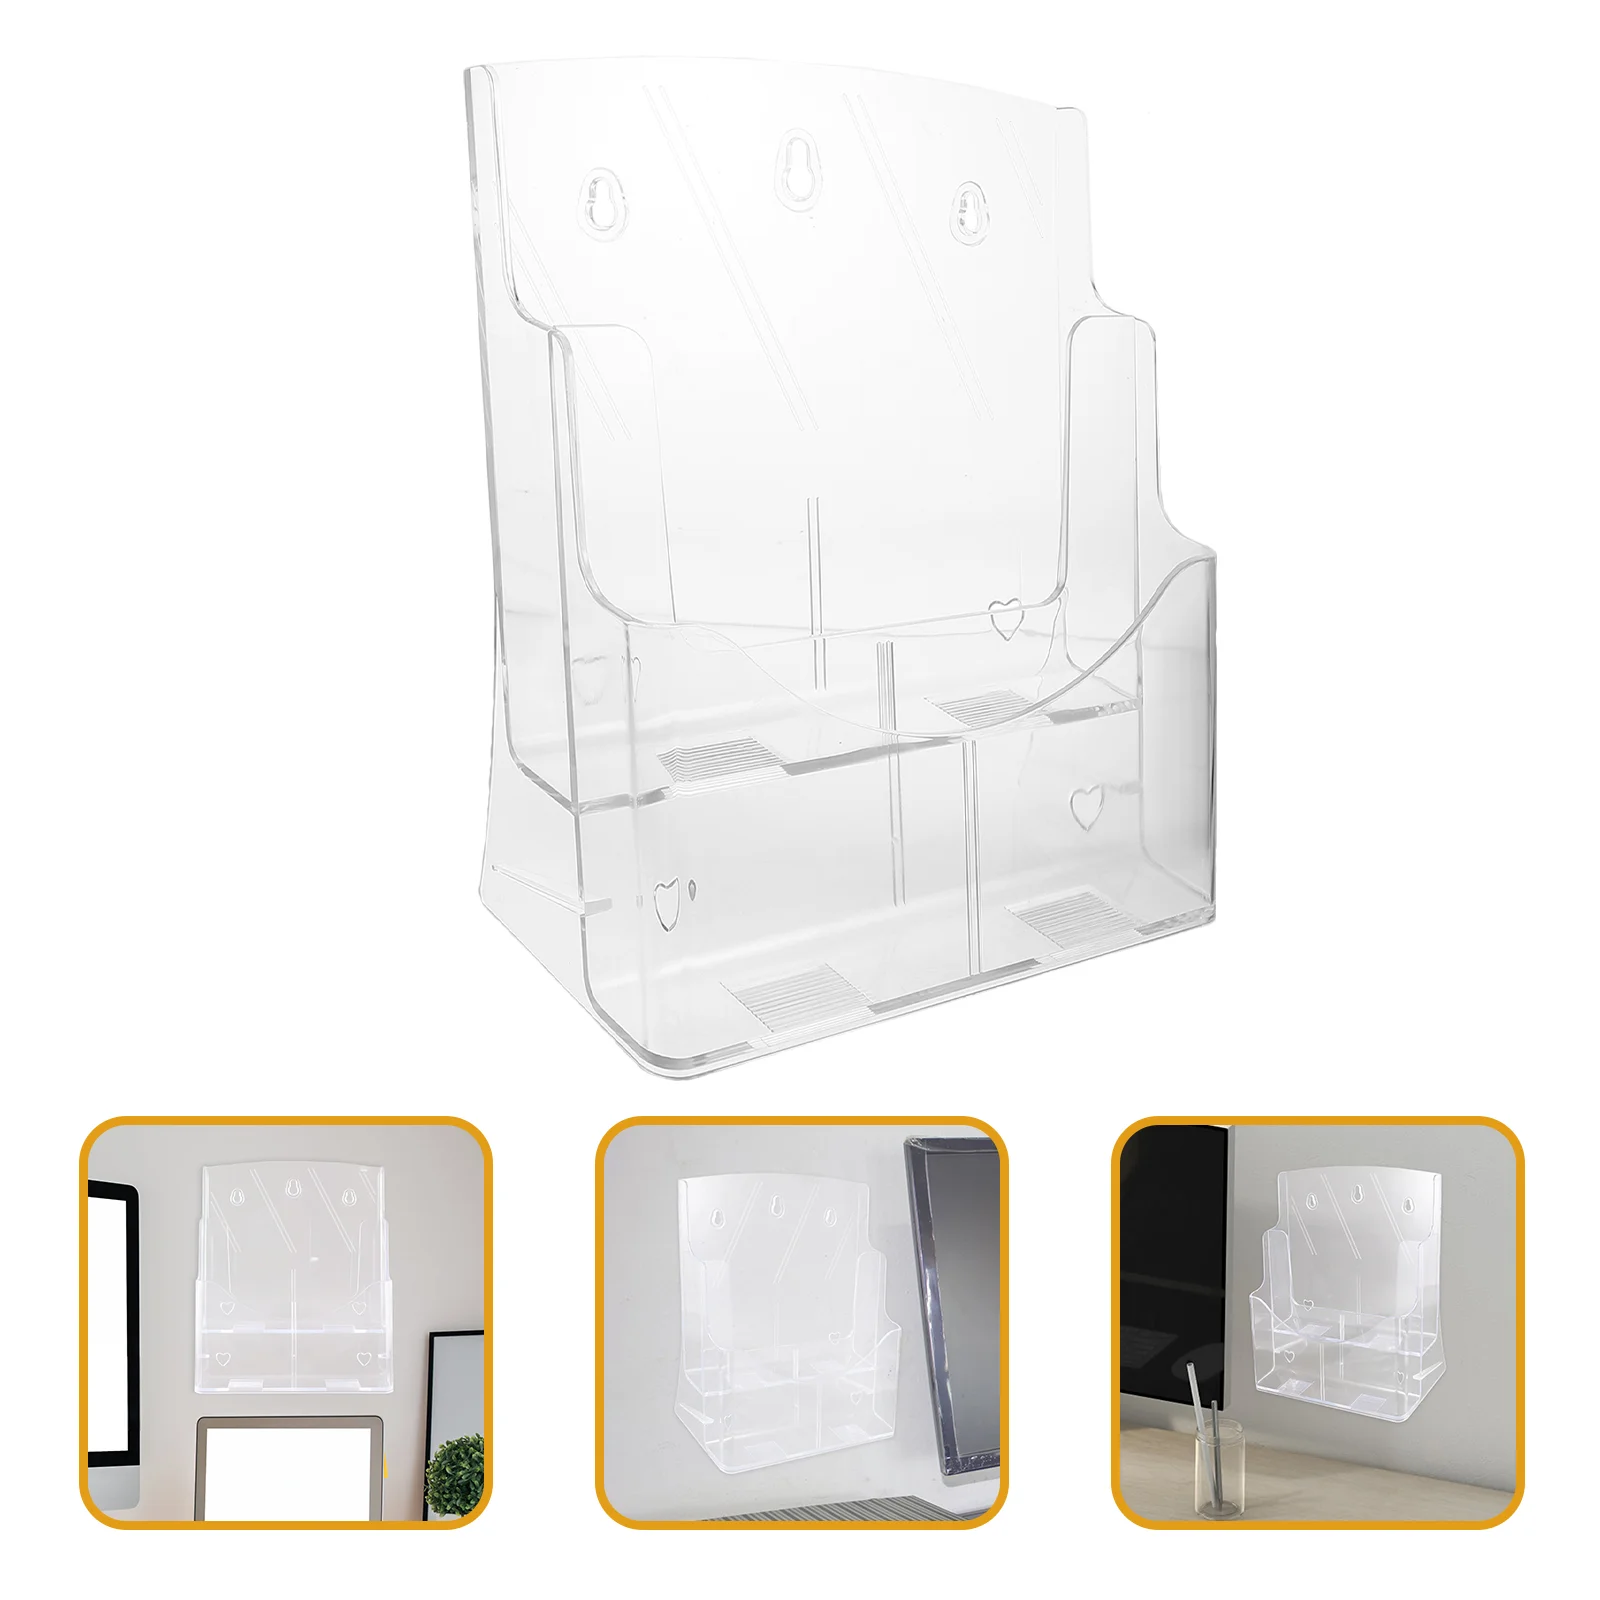 

Booklet Clear Literature Stand Brochures Plastic File Folder Rack Transparent Storage Pamphlets Display Acrylic Office